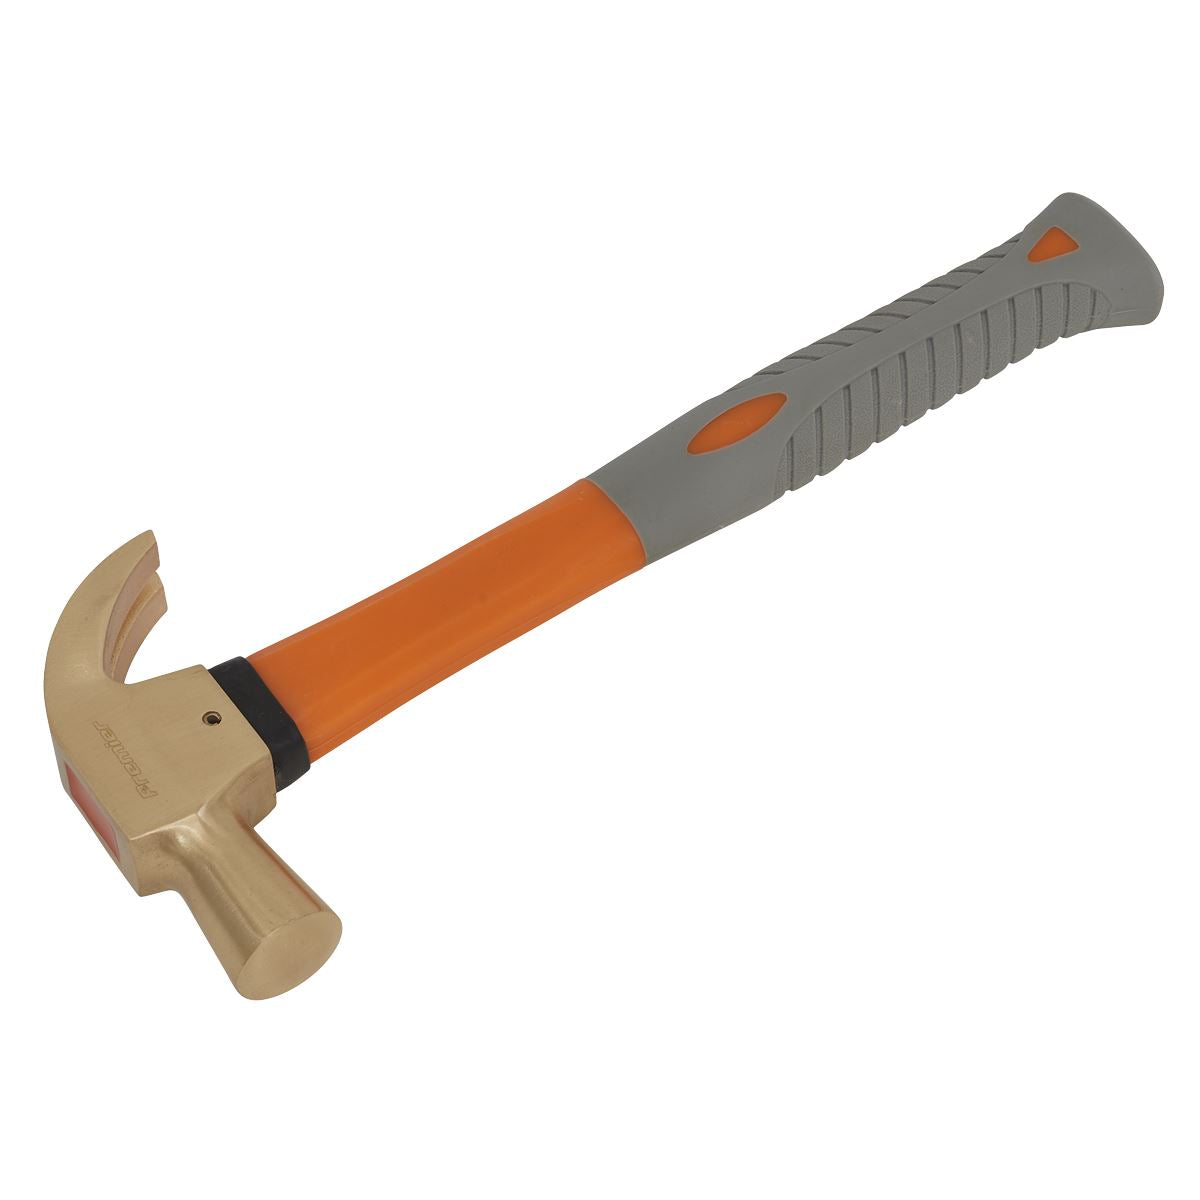 Sealey Claw Hammer 16oz - Non-Sparking NS076